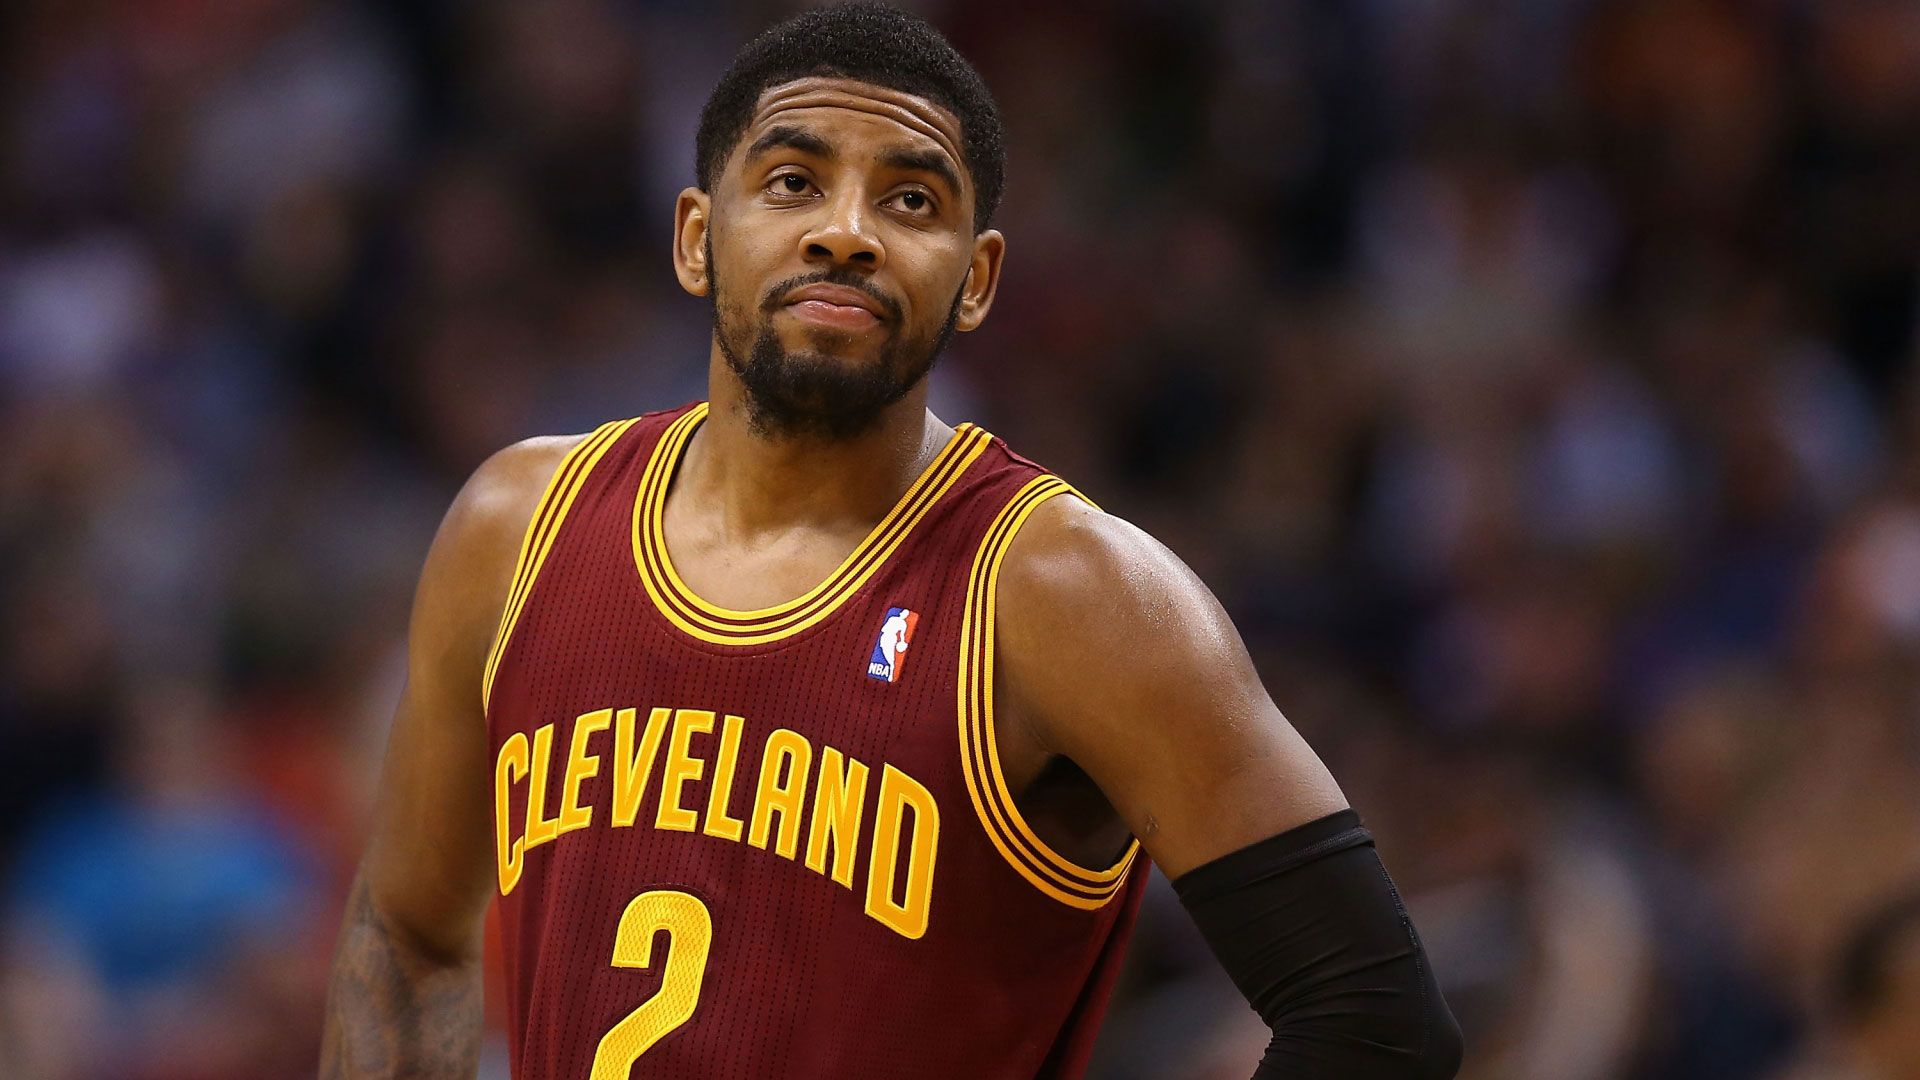 Nba 2k18 To Get Secondary Cover After Kyrie Irving Trade